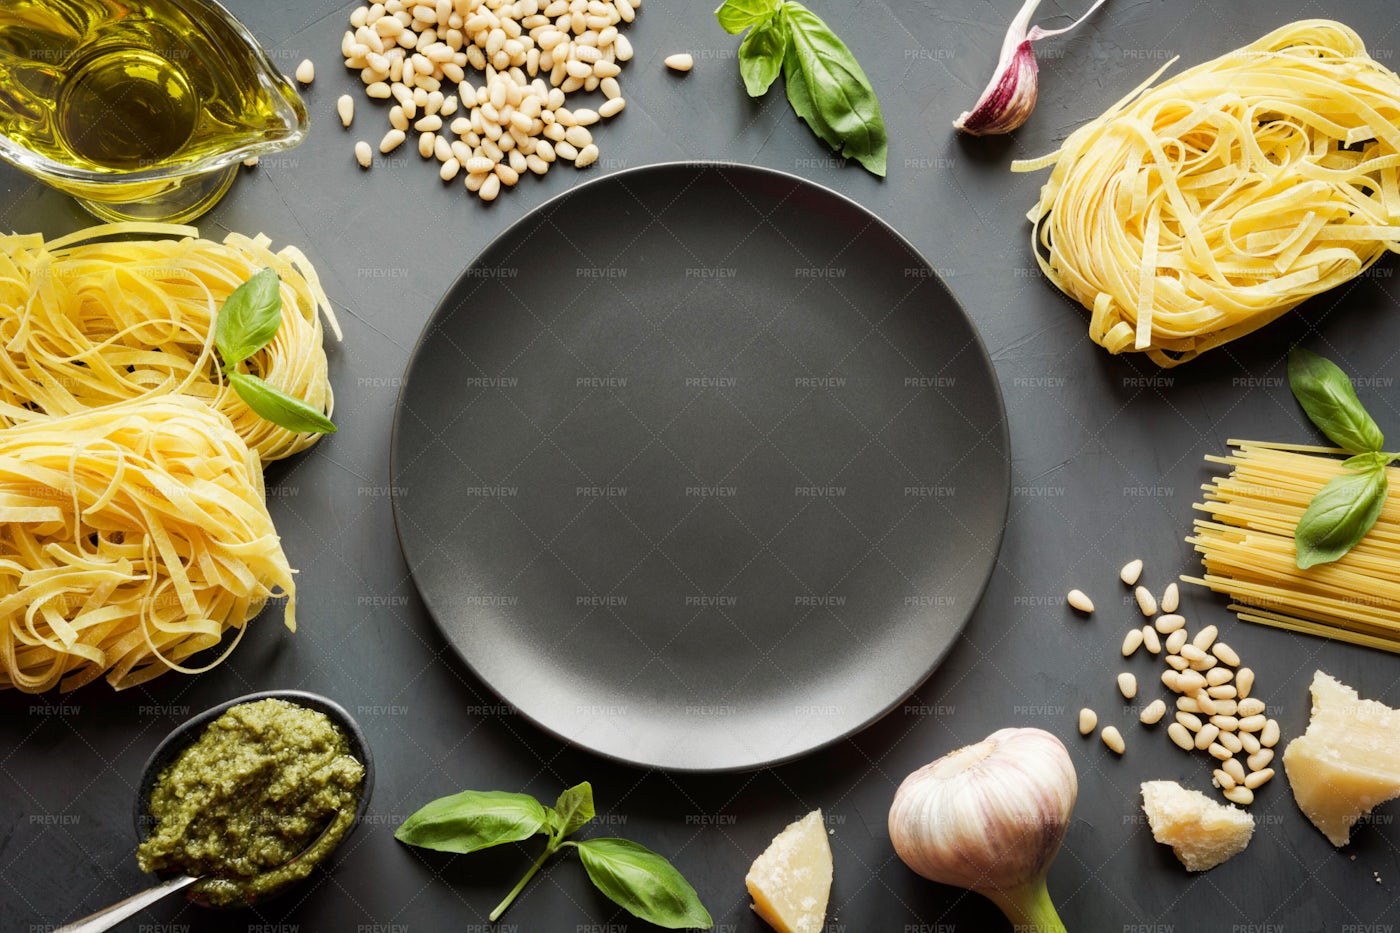 Raw Pasta Ingredients By The Plate: Stock Photos